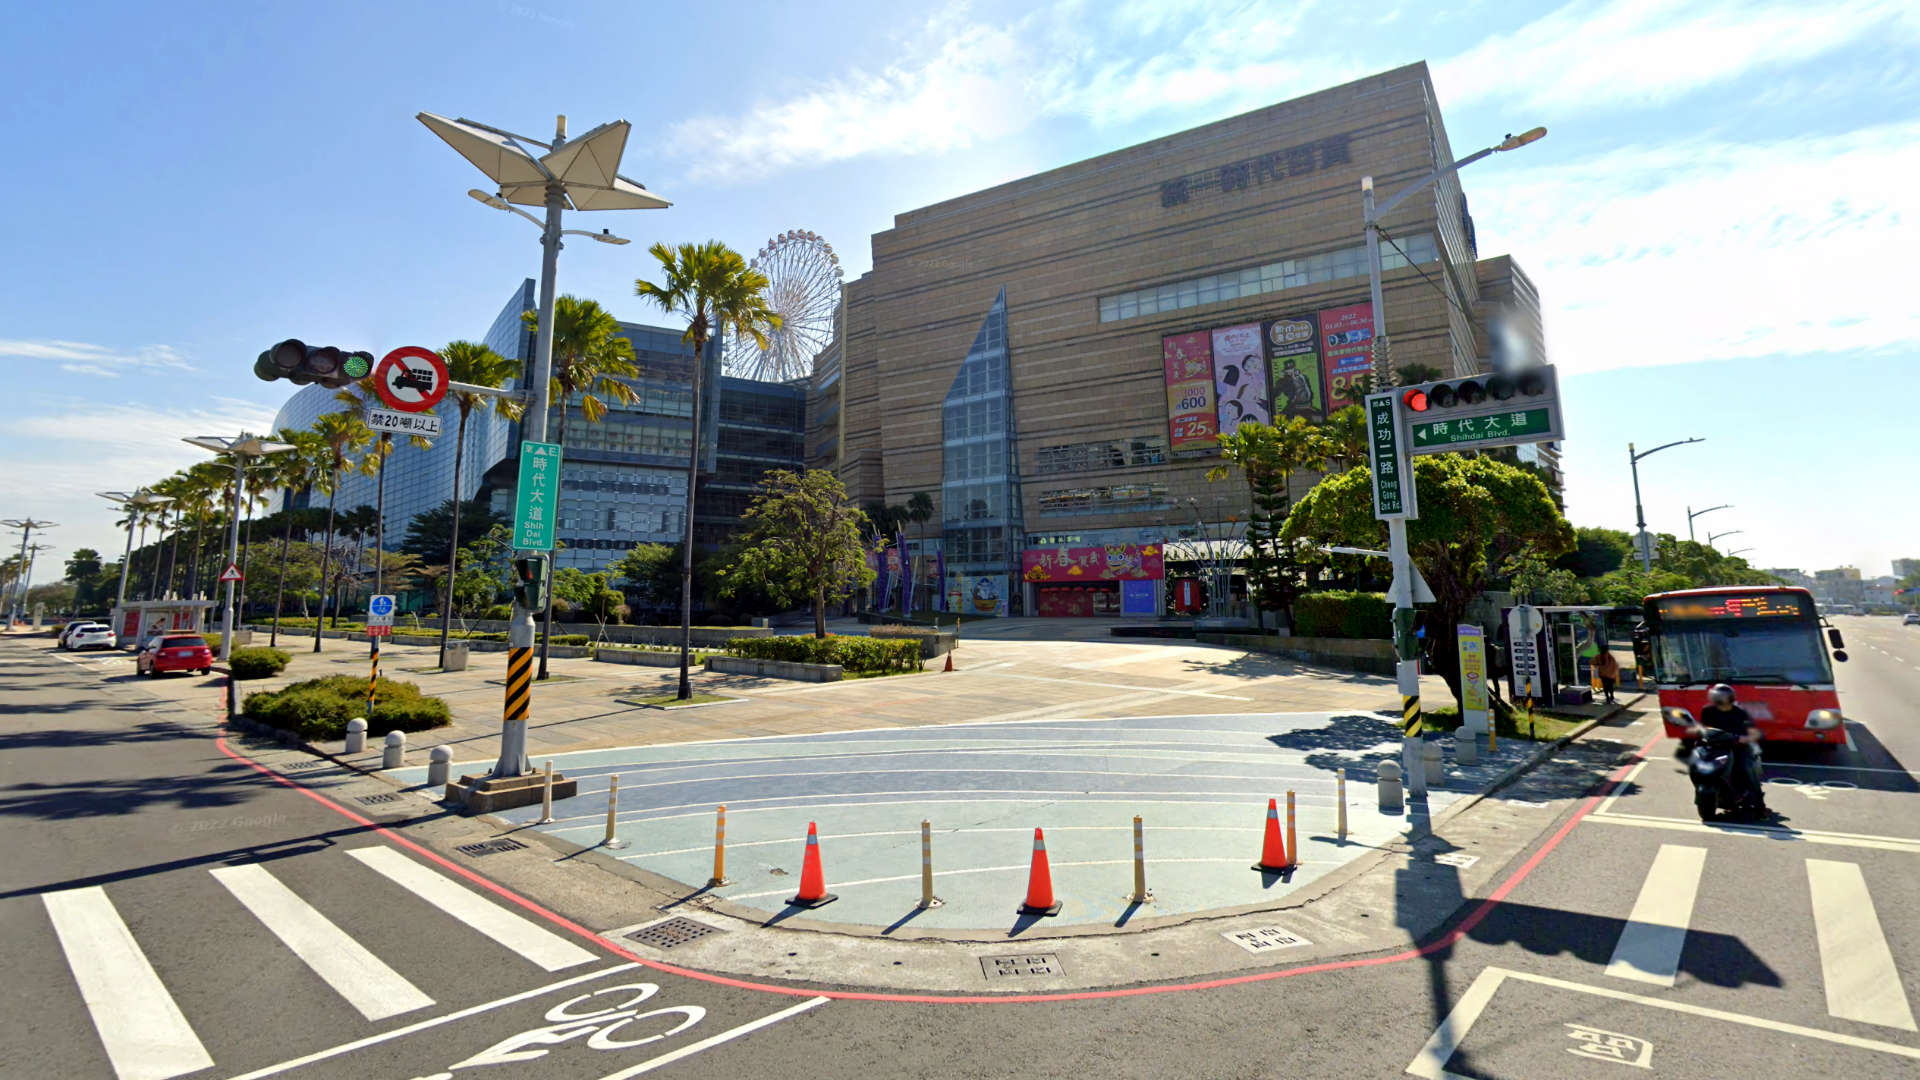 Daytime photo of the entrance to Dream Mall. It is a large building with a ferris wheel on the roof.